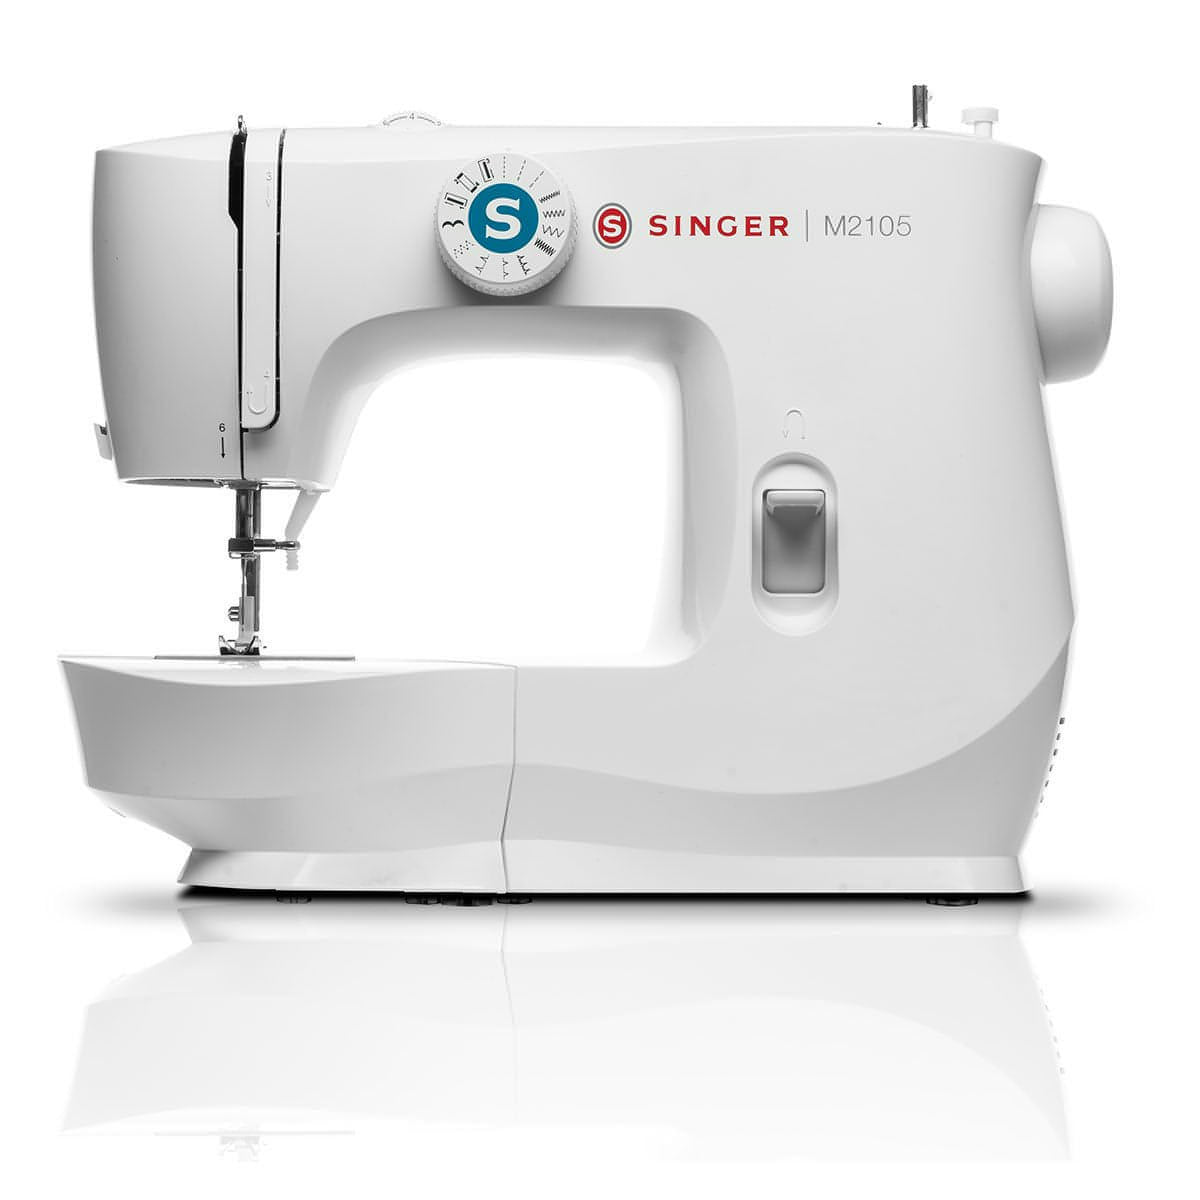 Singer M2105 Sewing Machine with Accessory Bundle